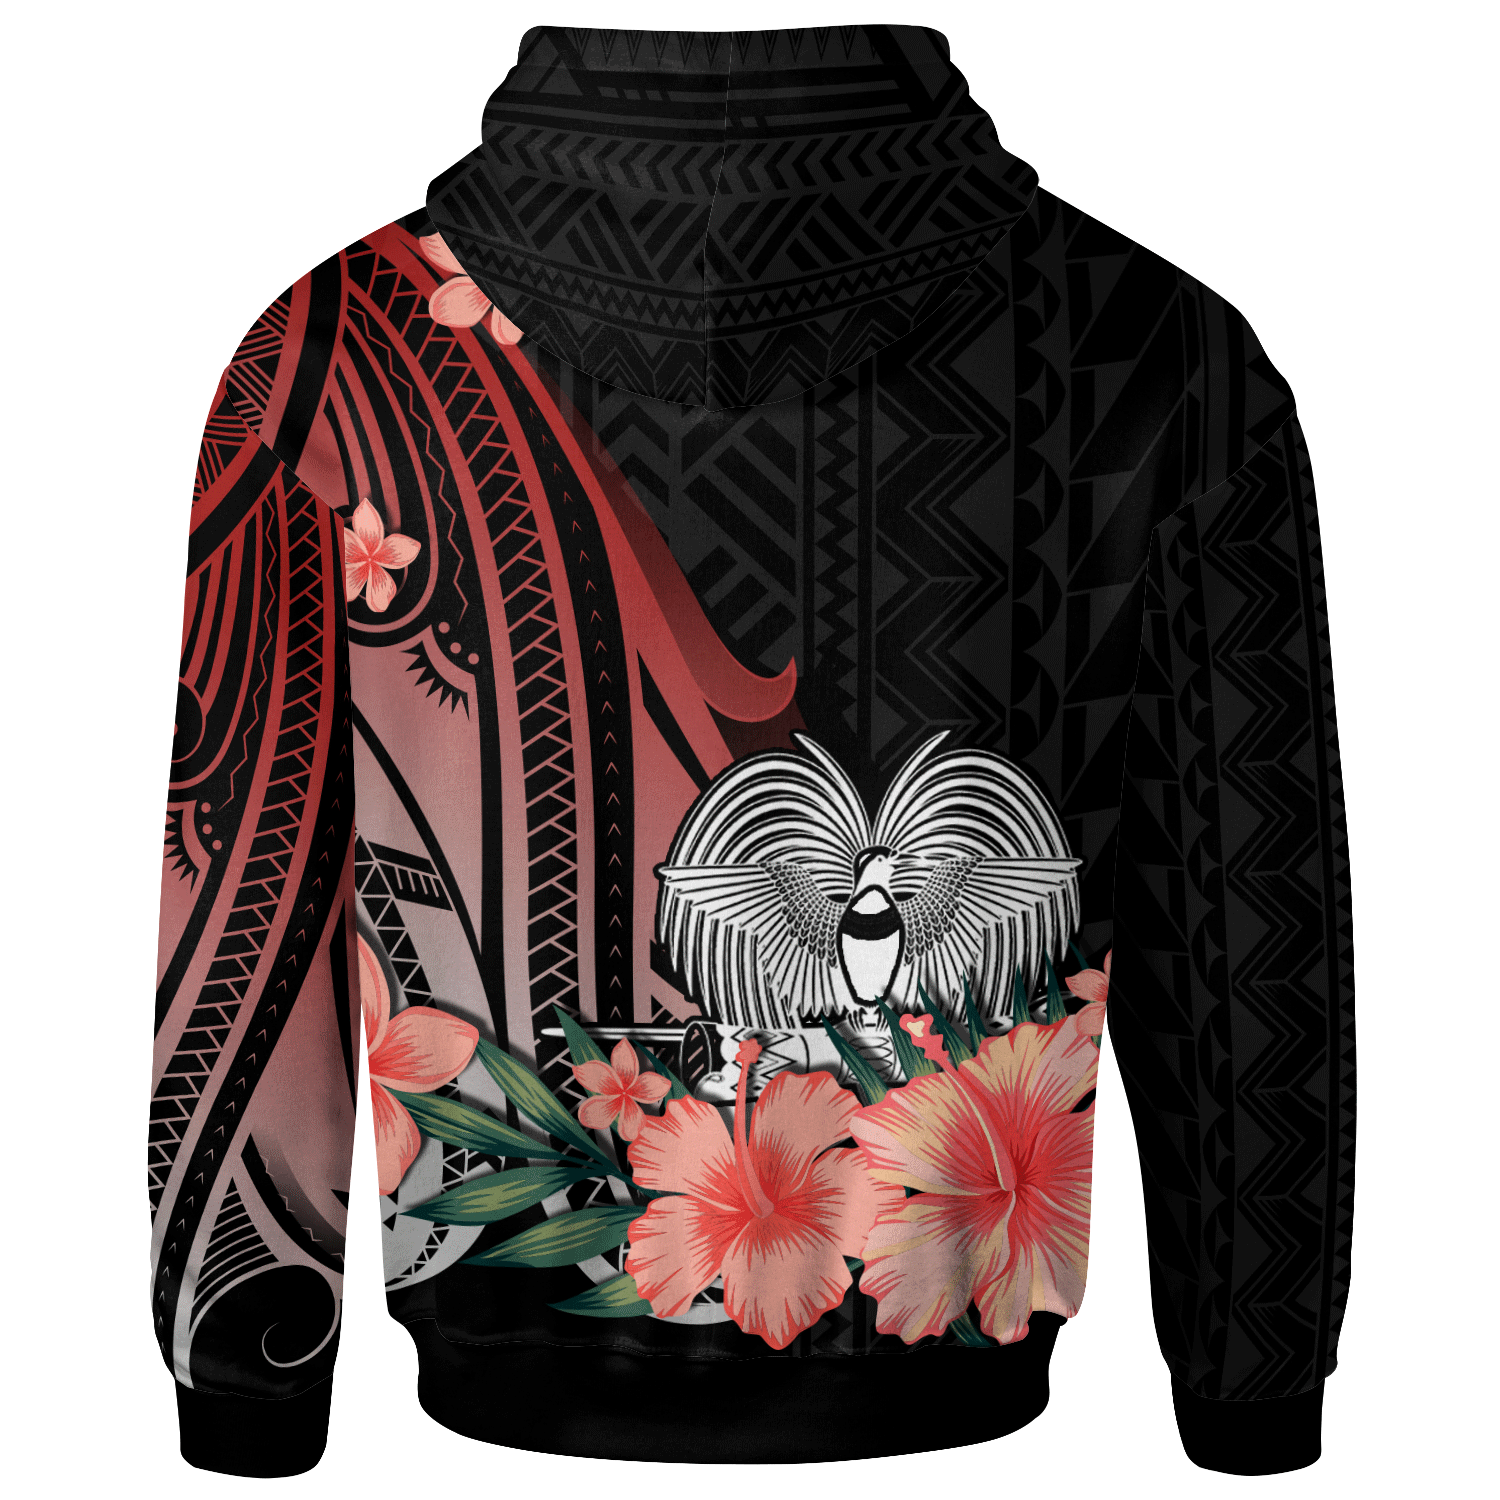 papua-new-guinea-zip-hoodie-red-polynesian-hibiscus-pattern-style